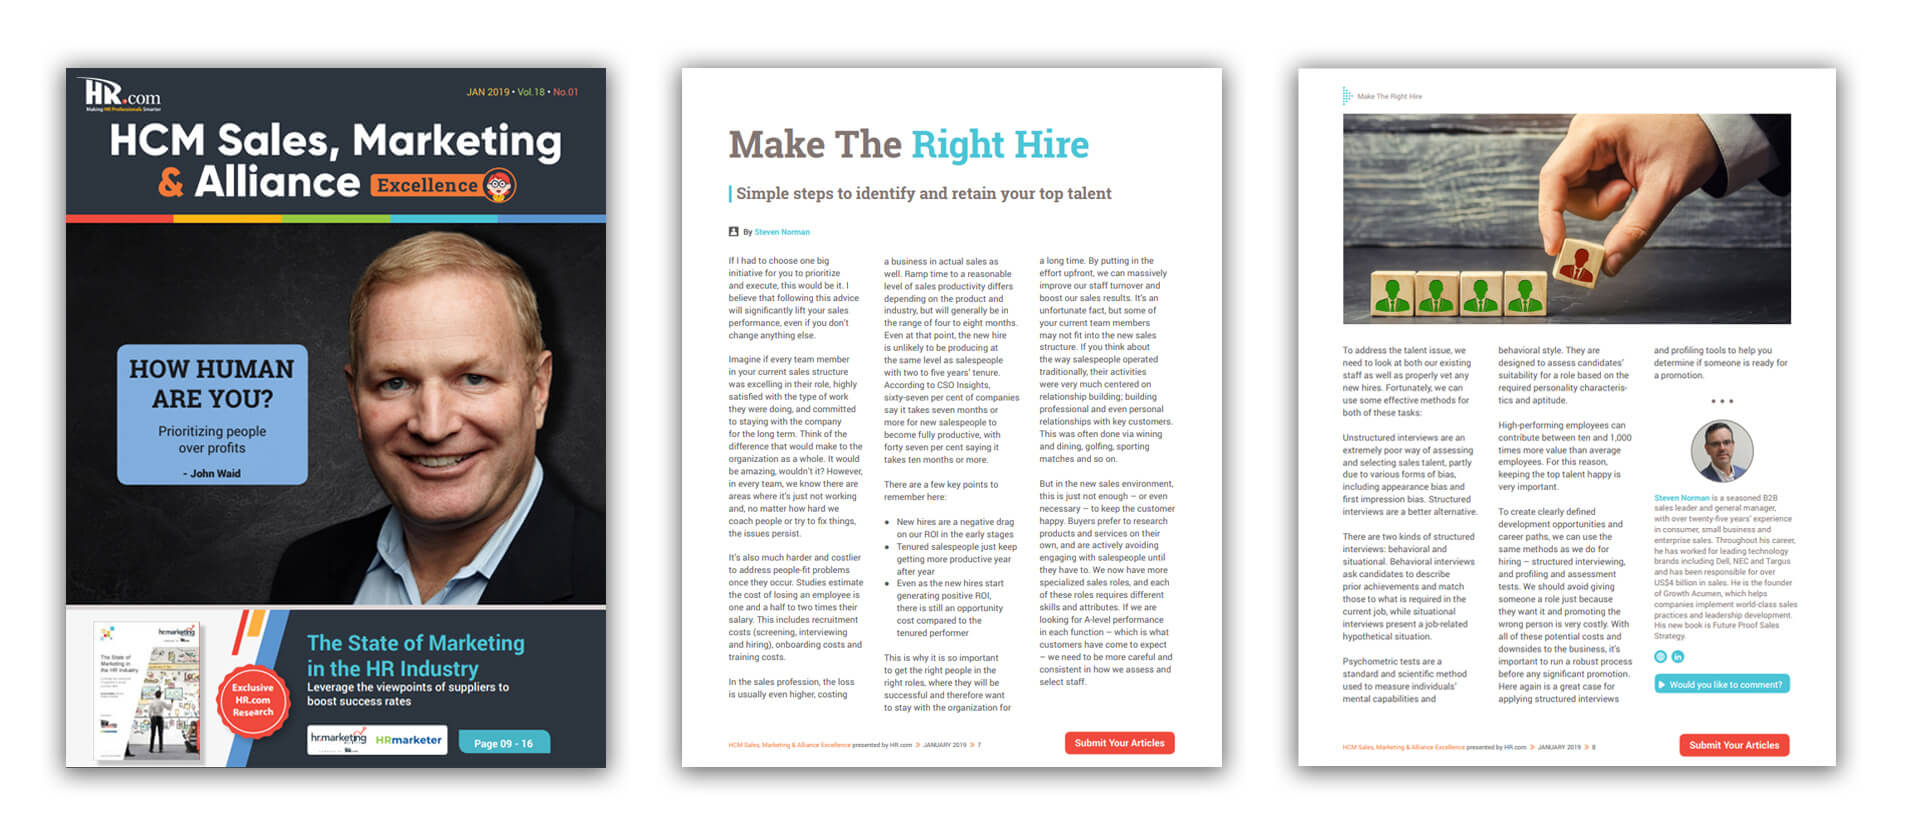 Making the right hire article